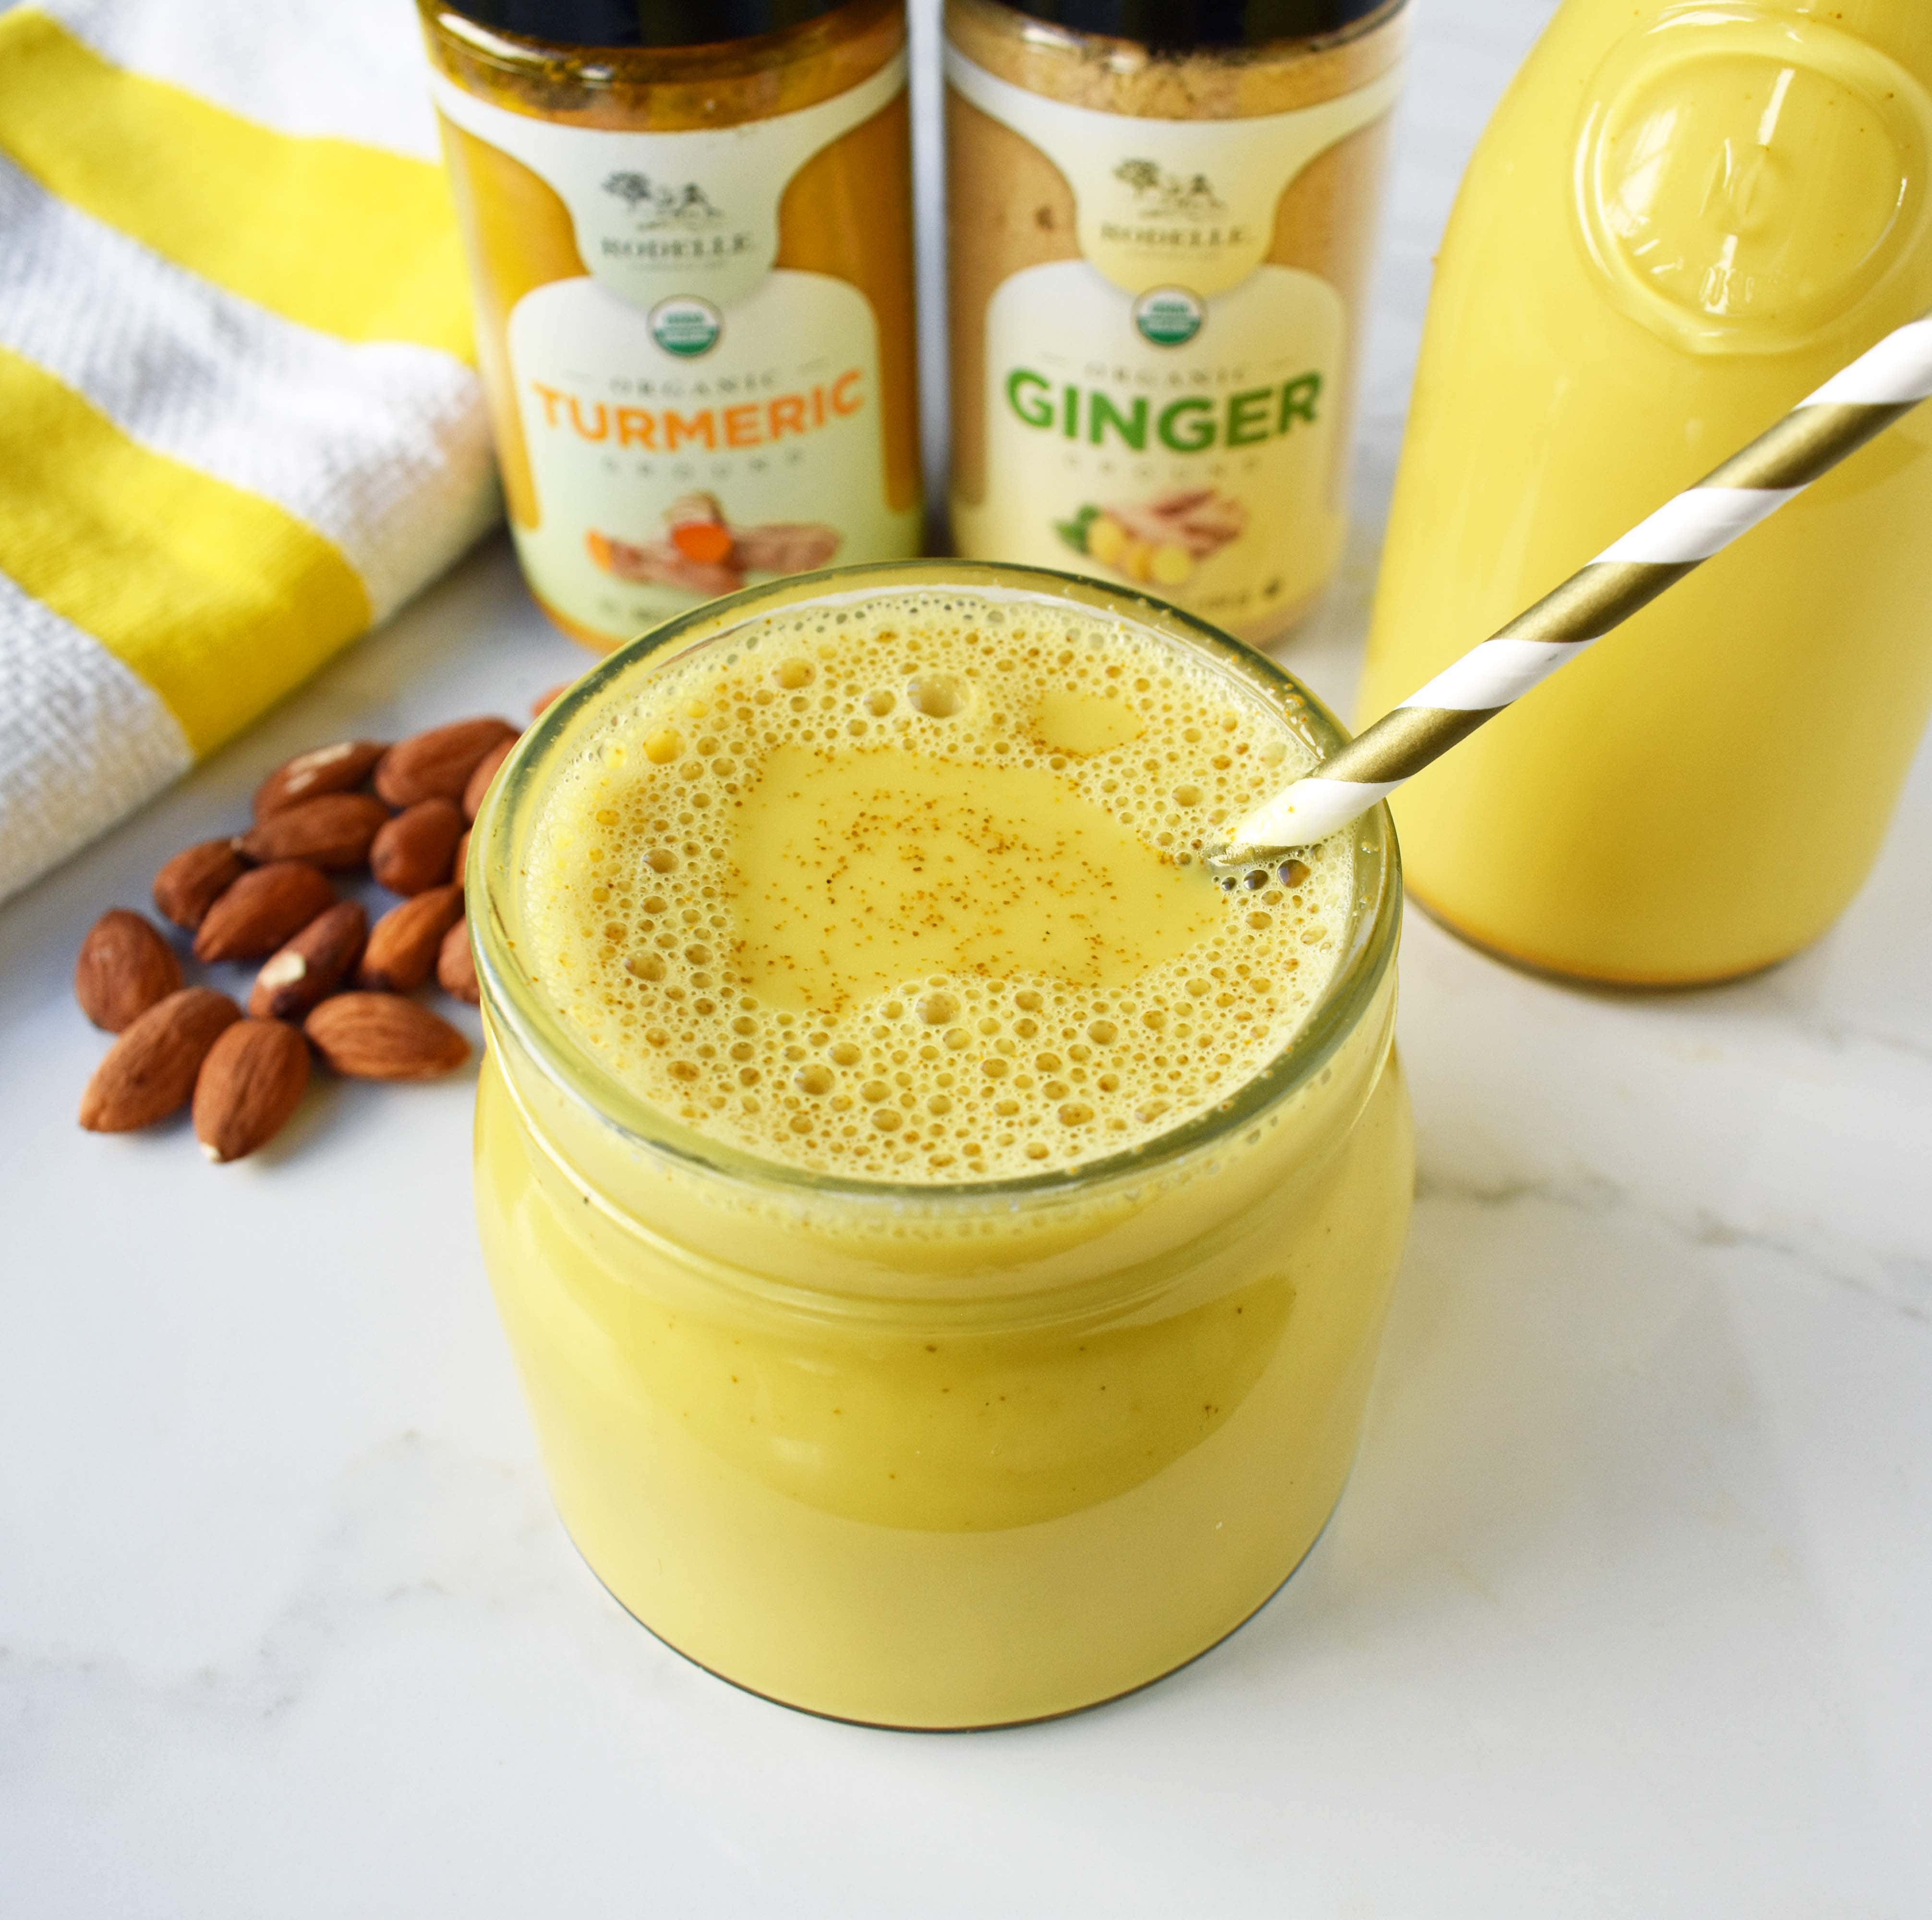 Ancient Golden Milk or Turmeric Tea Recipe. A healing tea full of anti-inflammatory and antioxidant benefits. Simmered with almond milk, turmeric, ginger, cinnamon and a touch of maple syrup. Warm and comforting turmeric tea. www.modernhoney.com